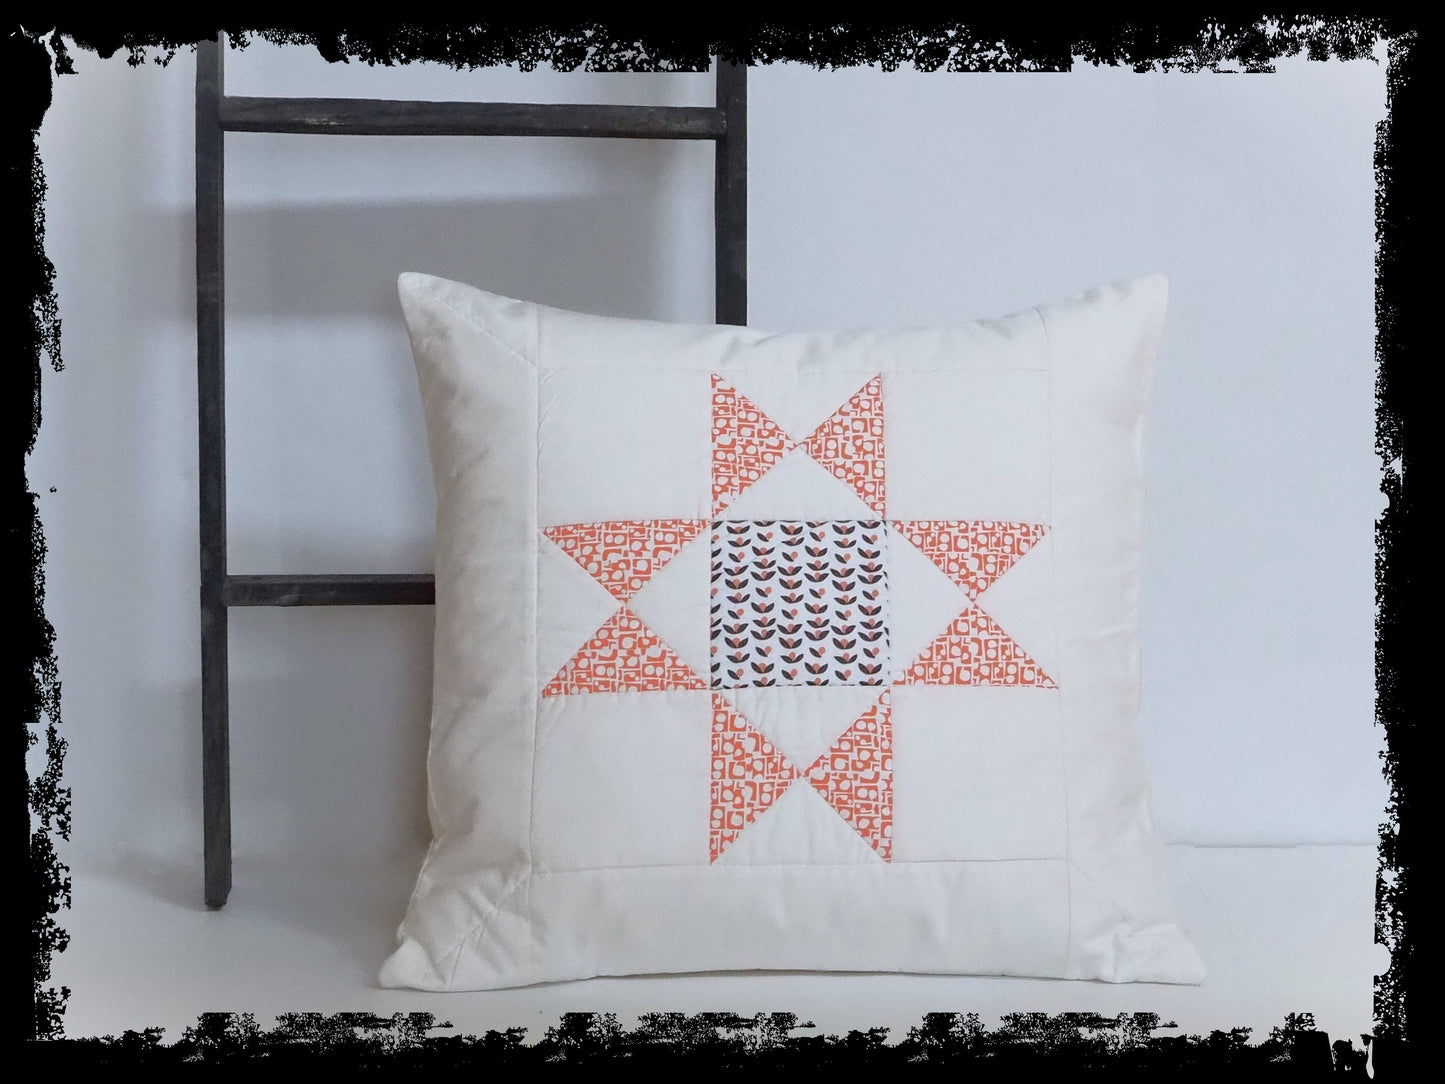 Coral Star Quilted Patchwork Pillow Cover